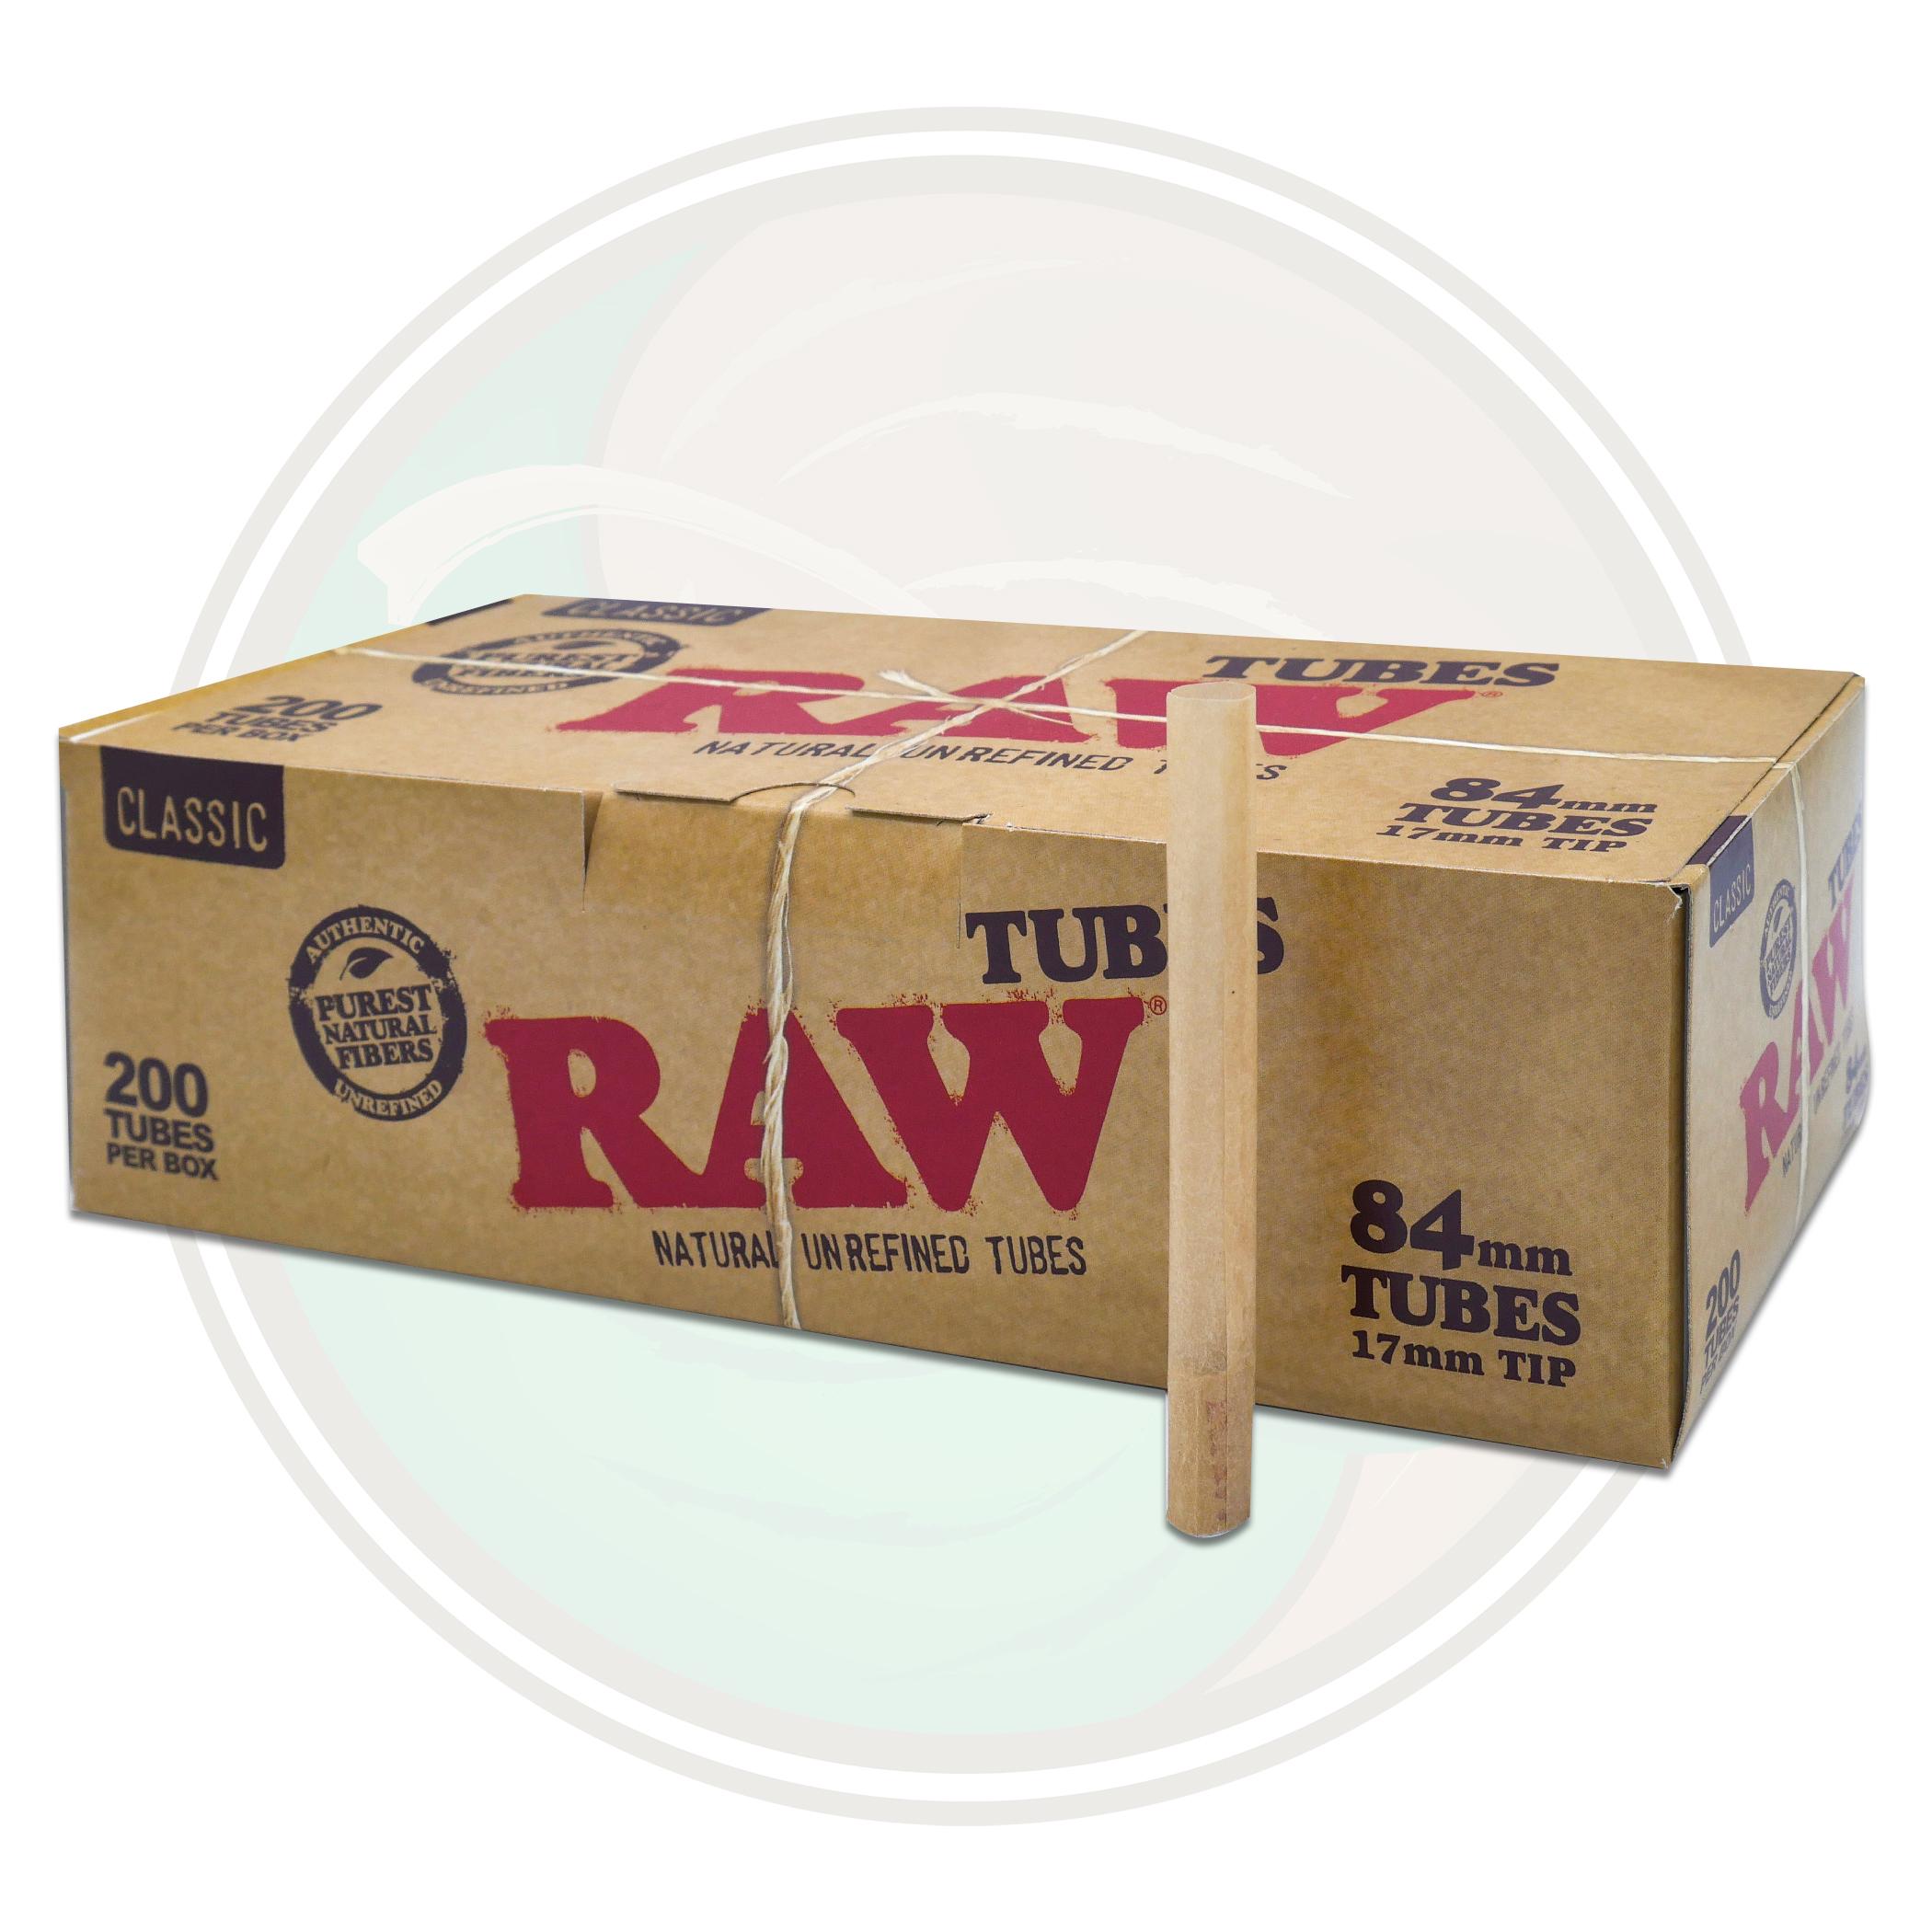 RAW All Natural Unrefined Tubes King Sized 200ct for sale at Leaf Only